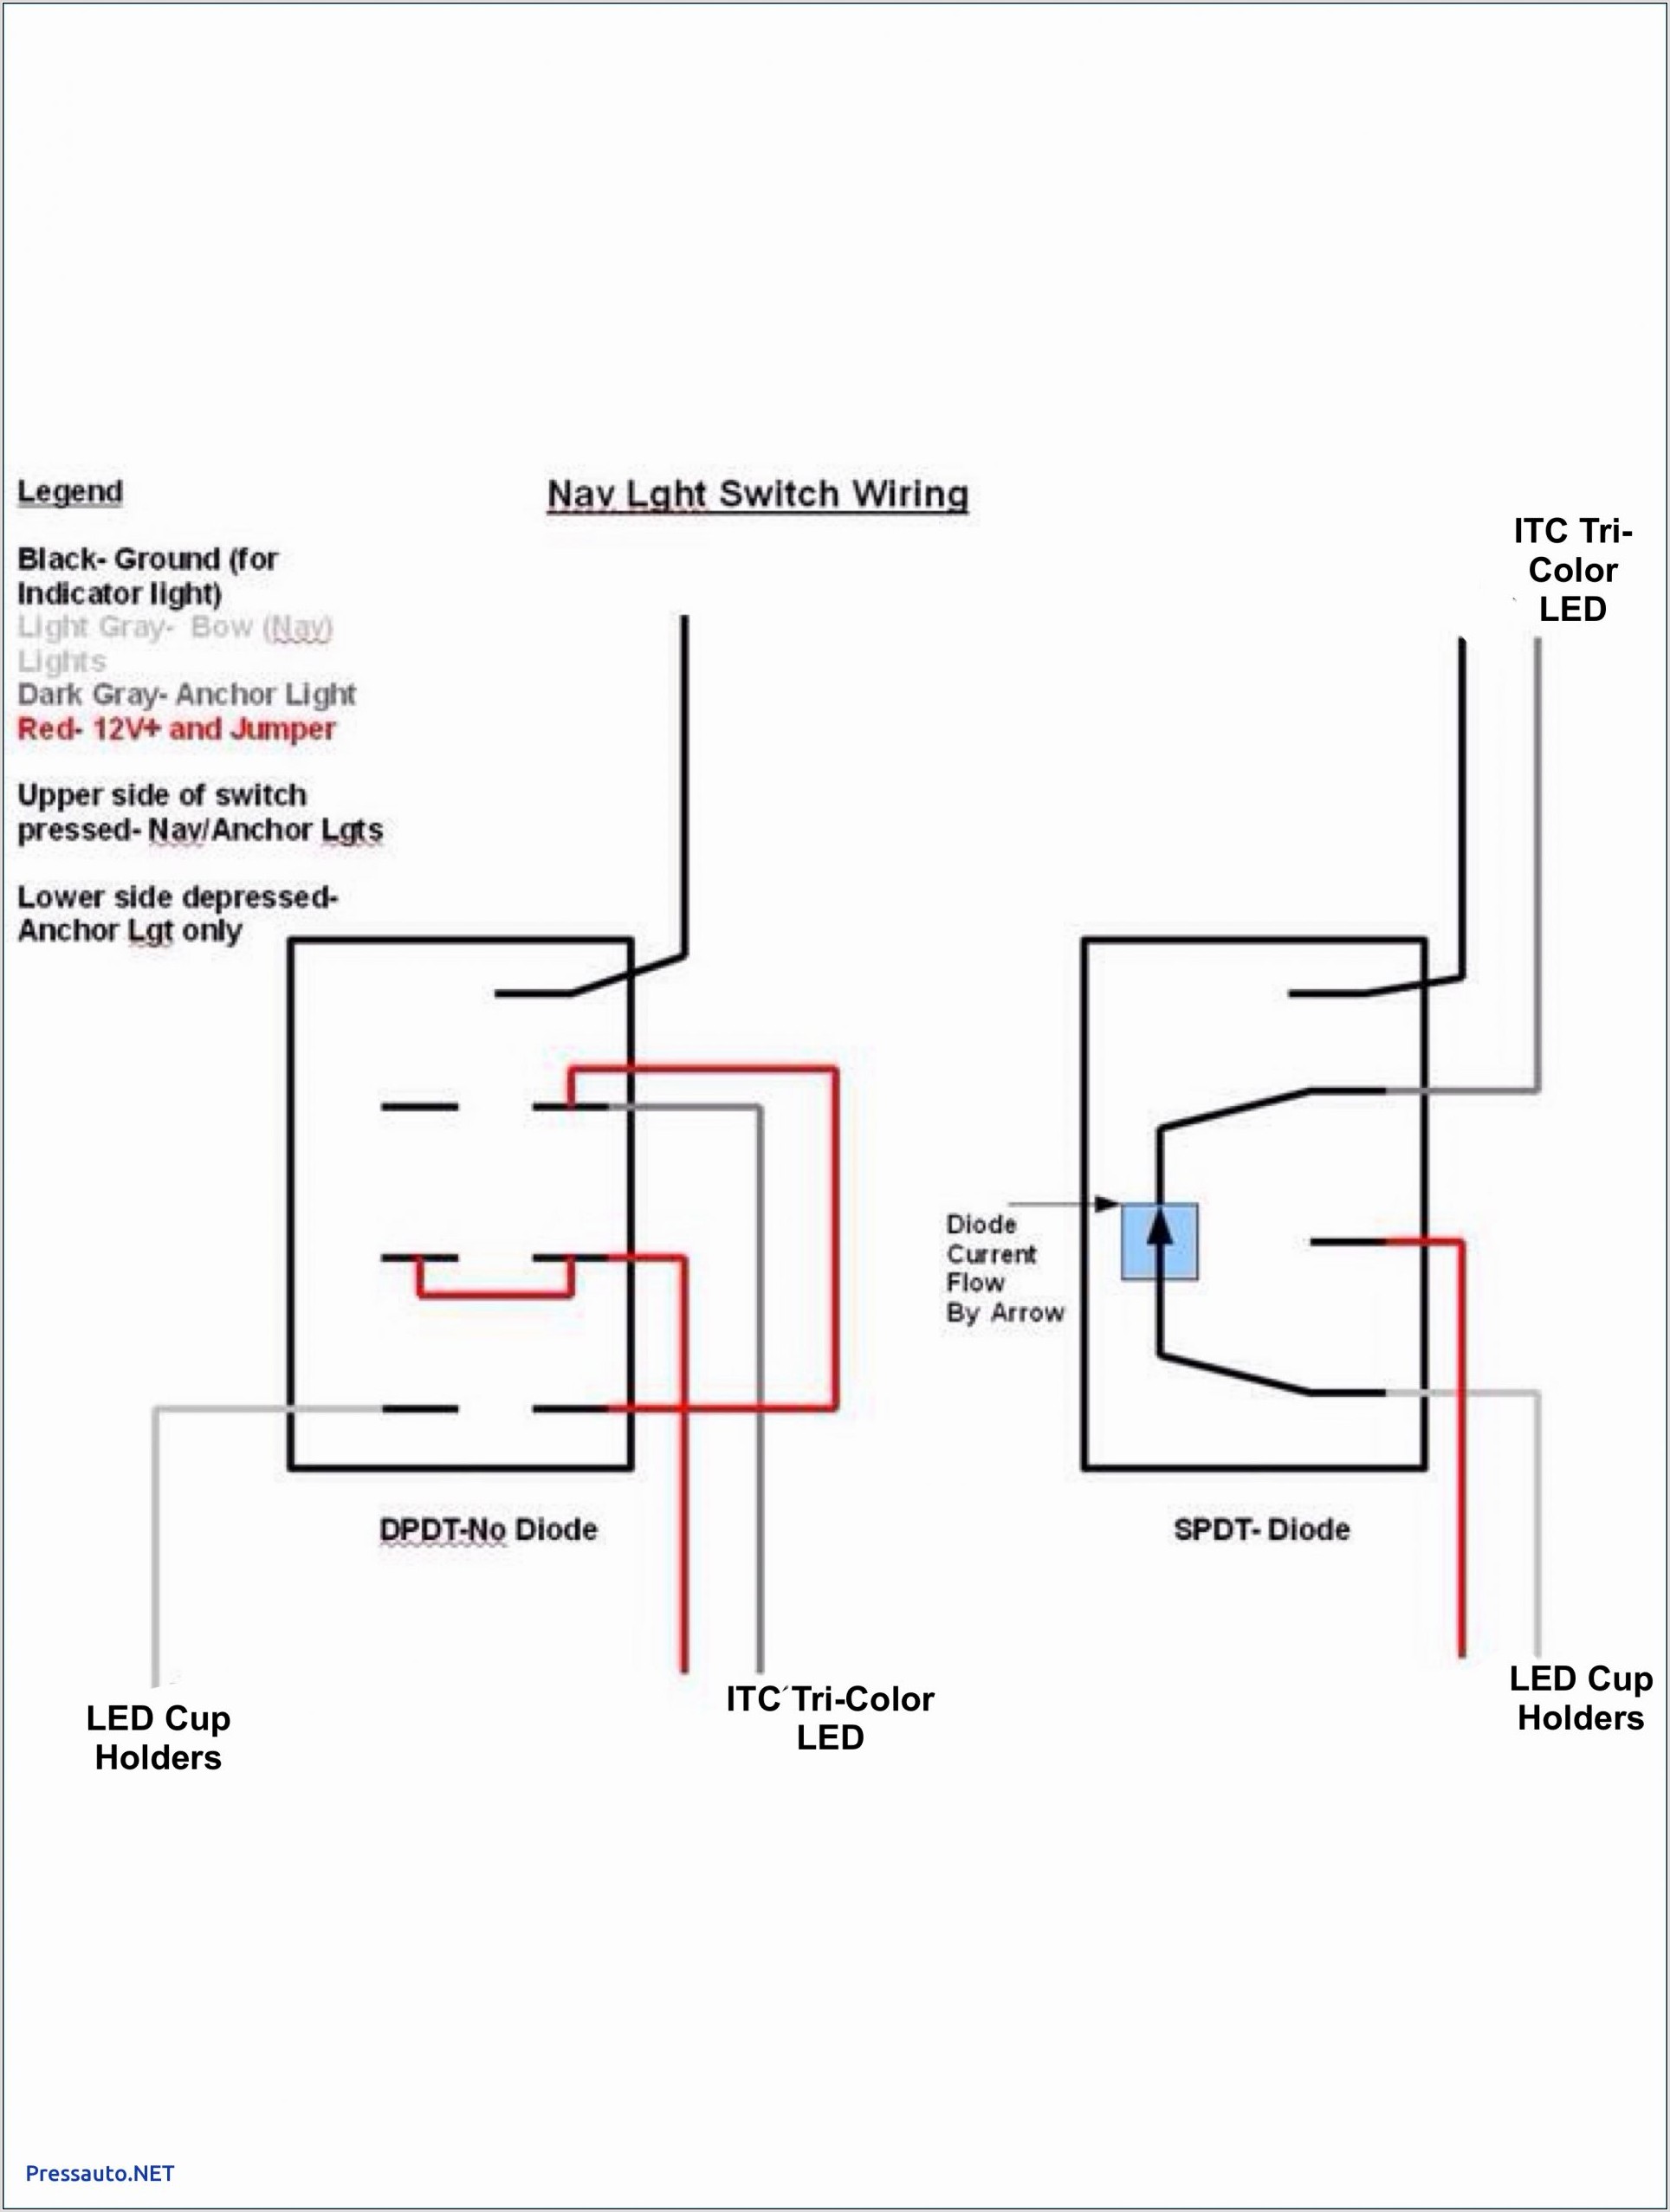 Carling V1d1 Switch Wiring Diagram